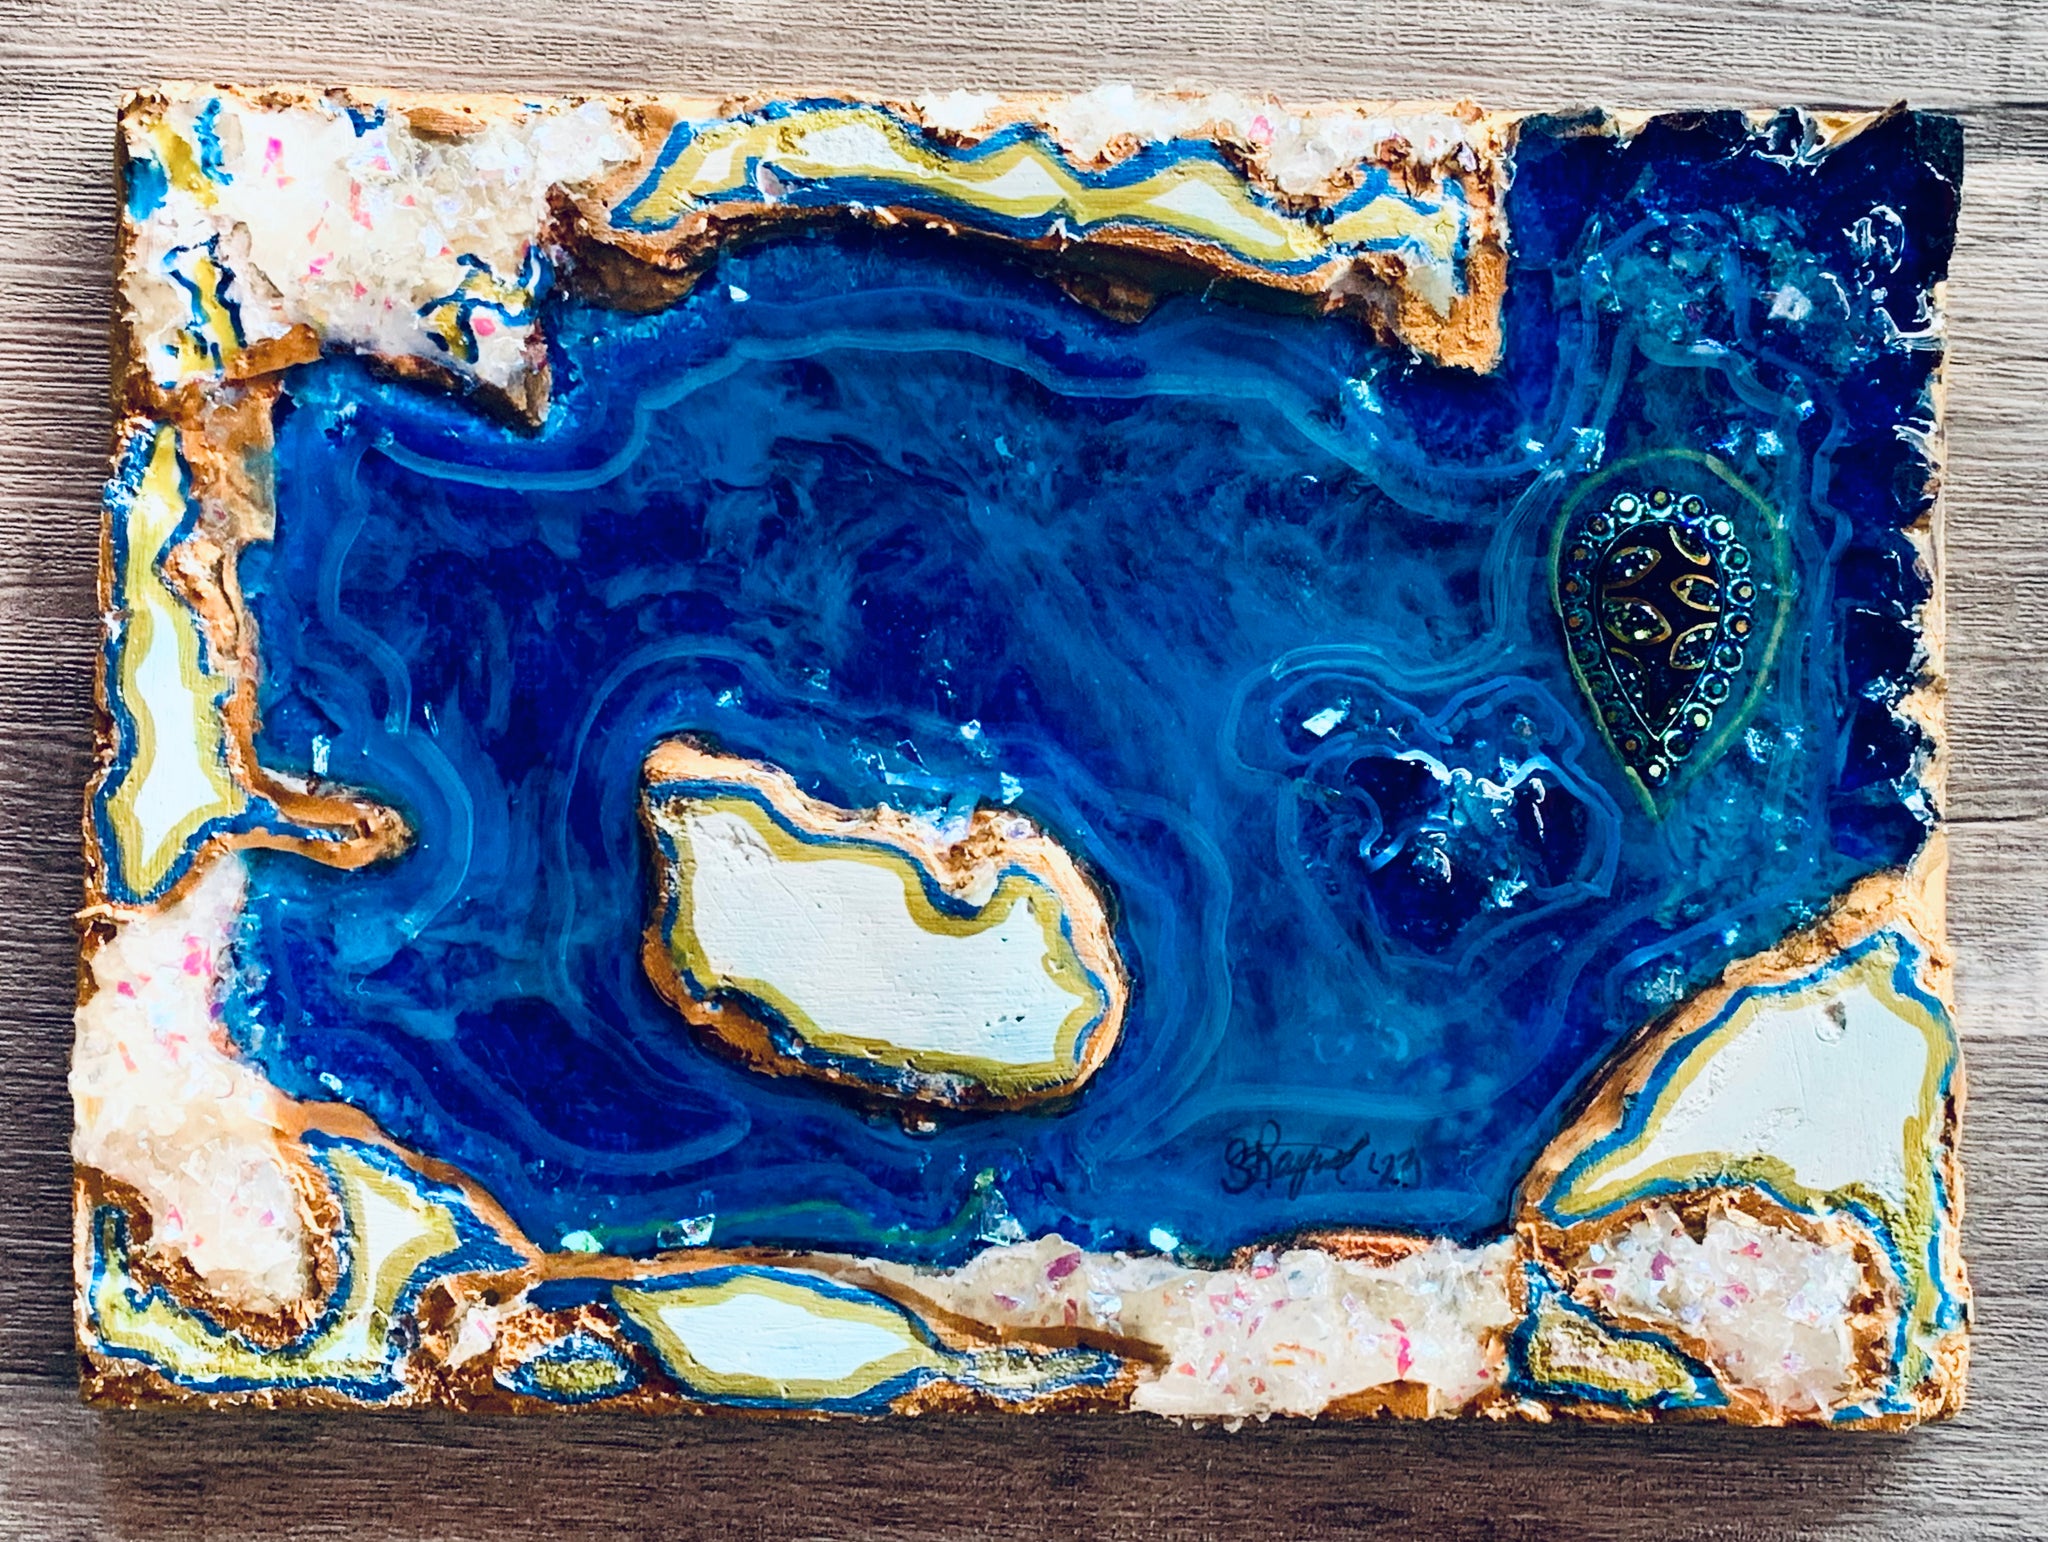 "By The Bay" 5"x7" Mixed Media Crystal and Resin Art